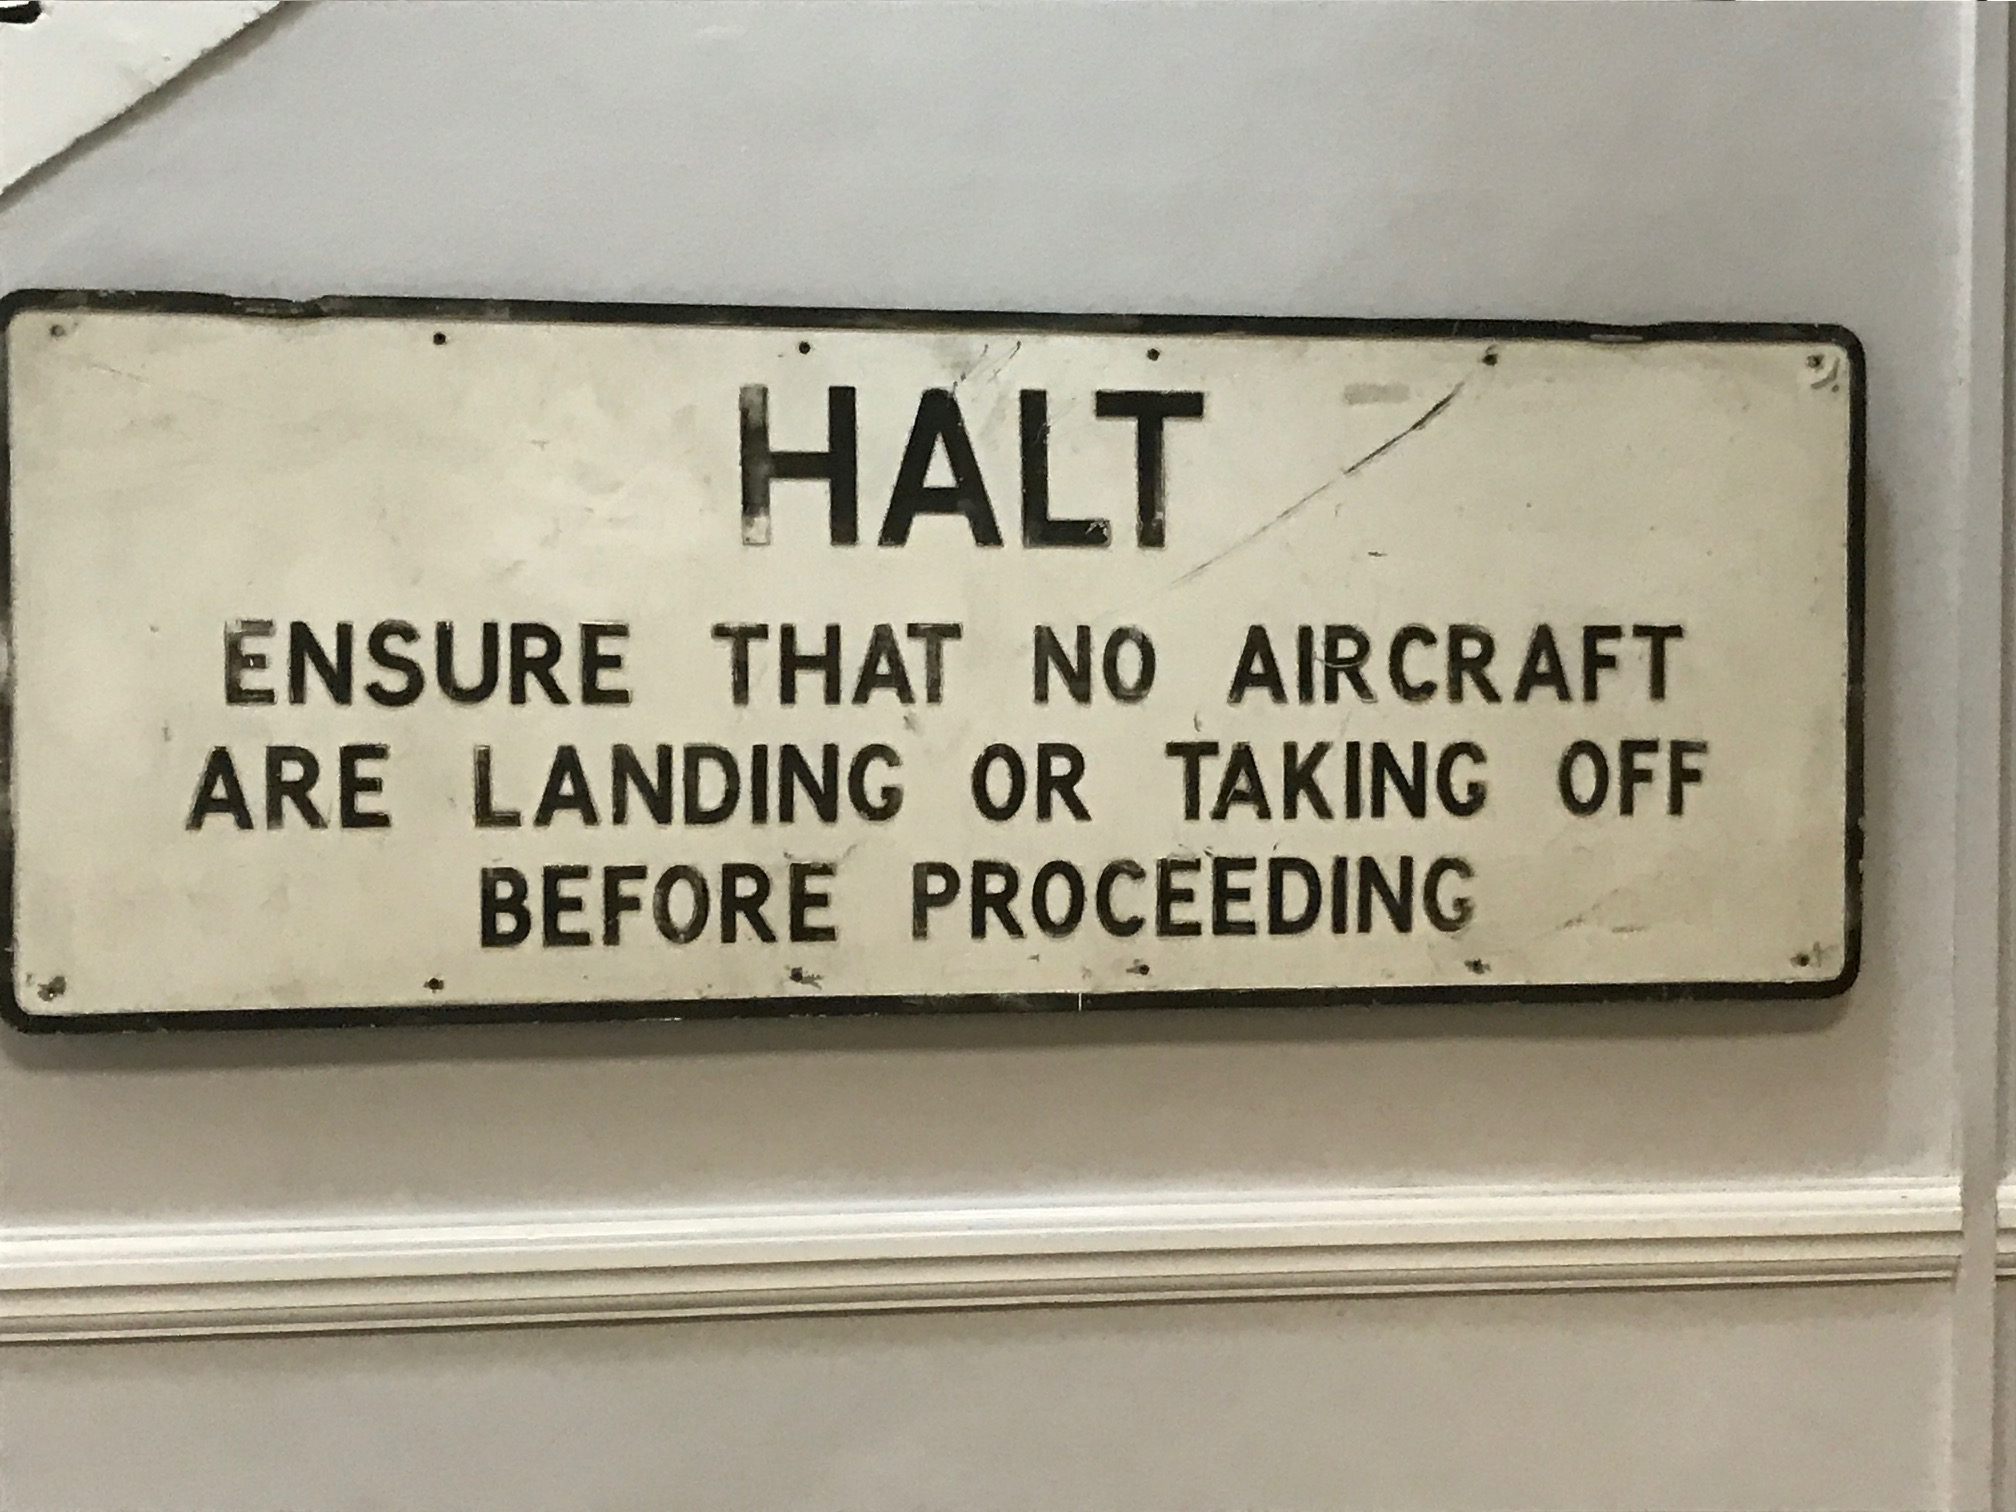 Croydon Airport: "Halt. Ensure that no Aircraft are landing or taking off before proceeding."